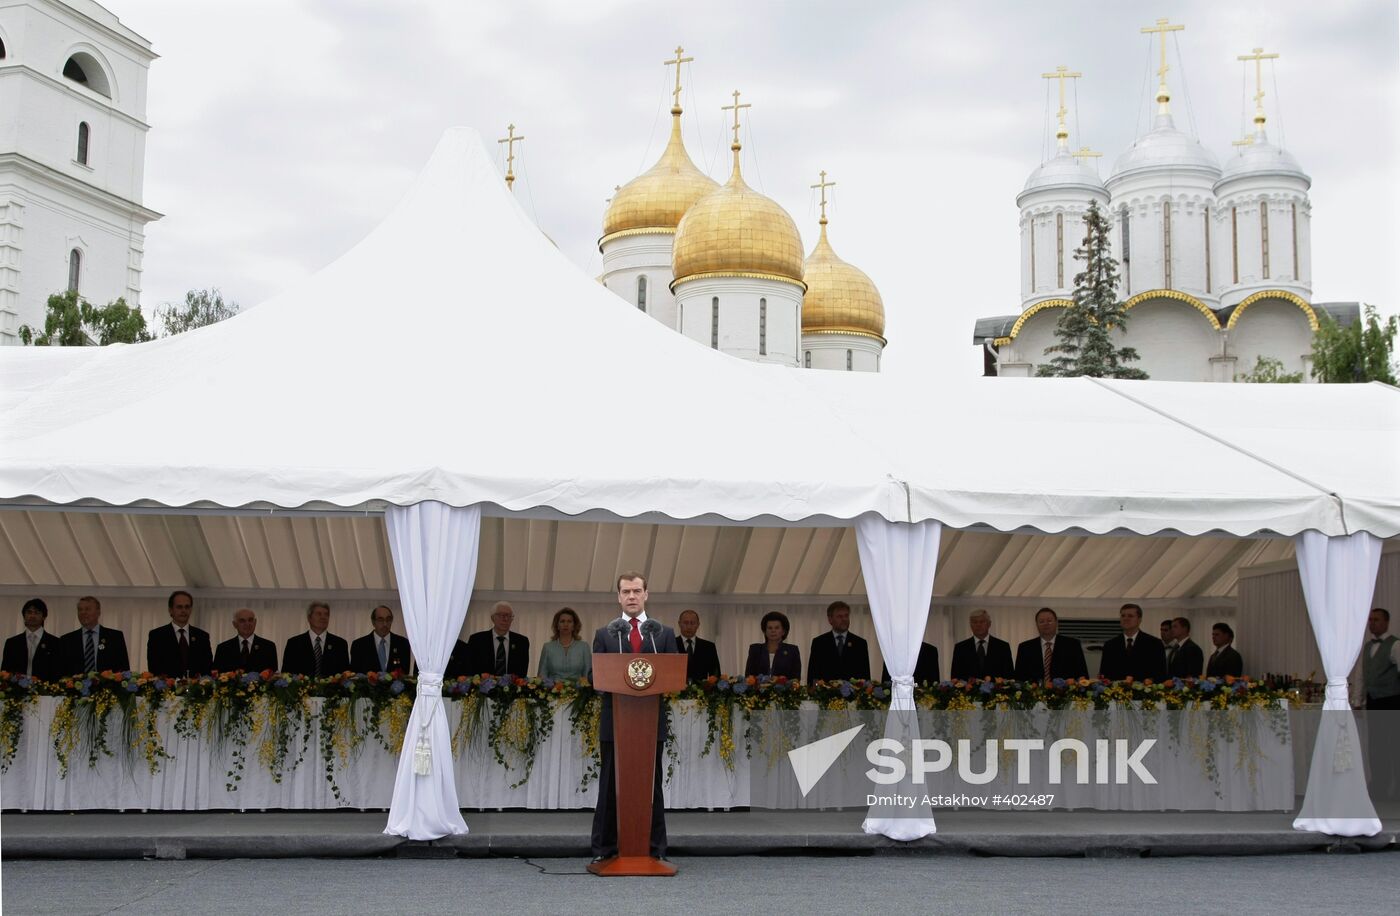 Reception on Russia Day at the Kremlin